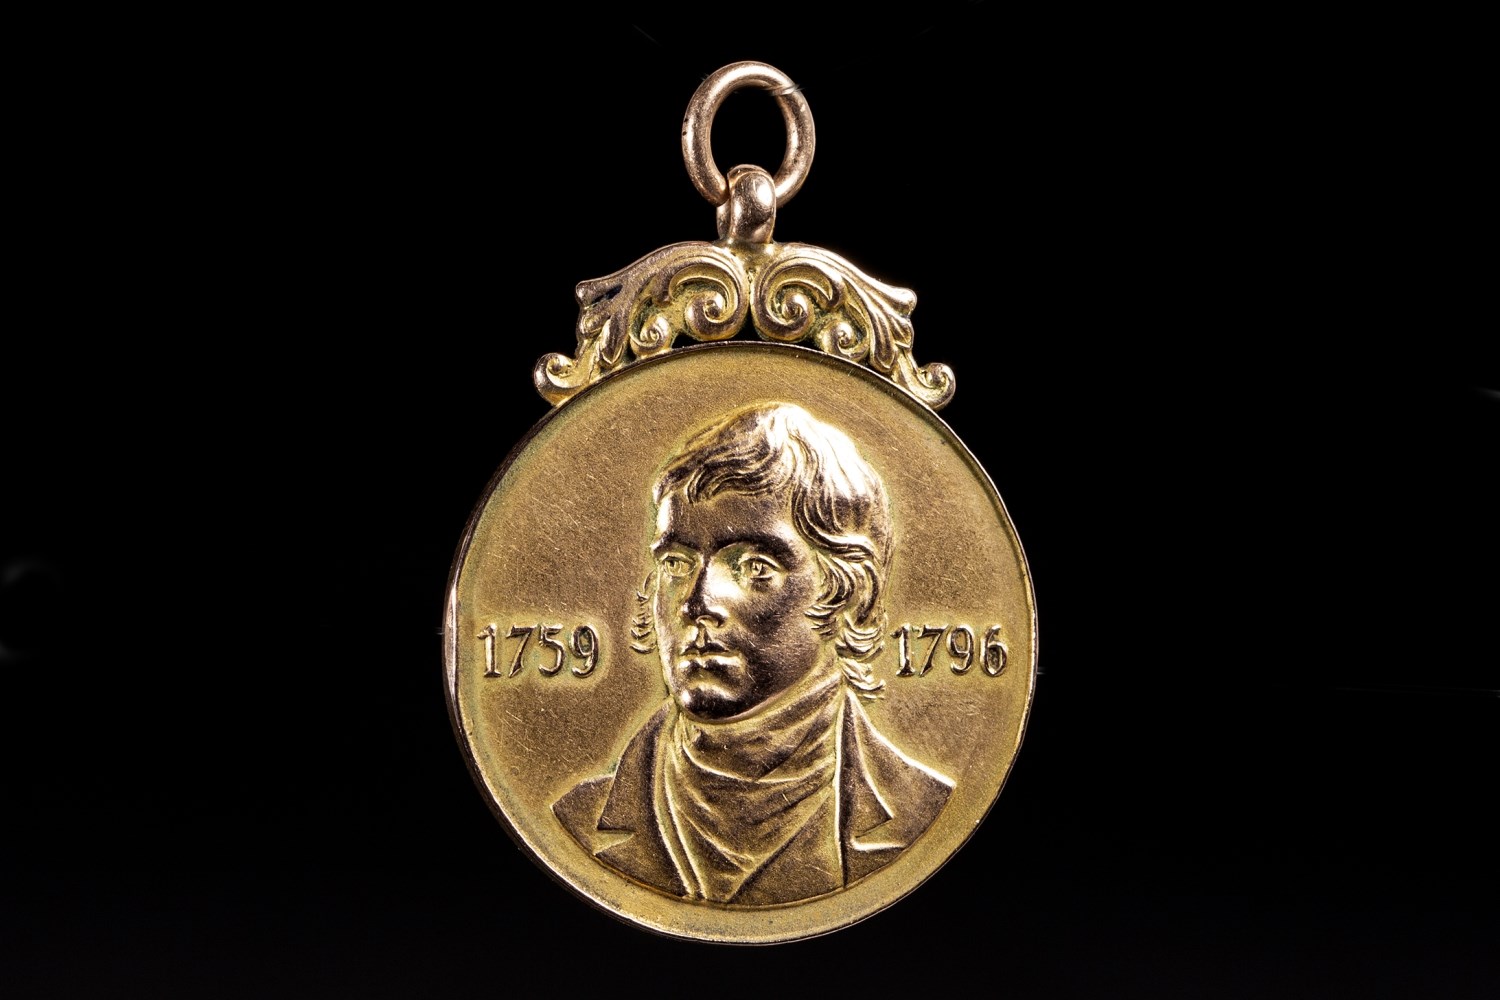 RARE ROBERT BURNS GOLD MEDAL, AWARDED TO ALEX JACKSON IN 1926